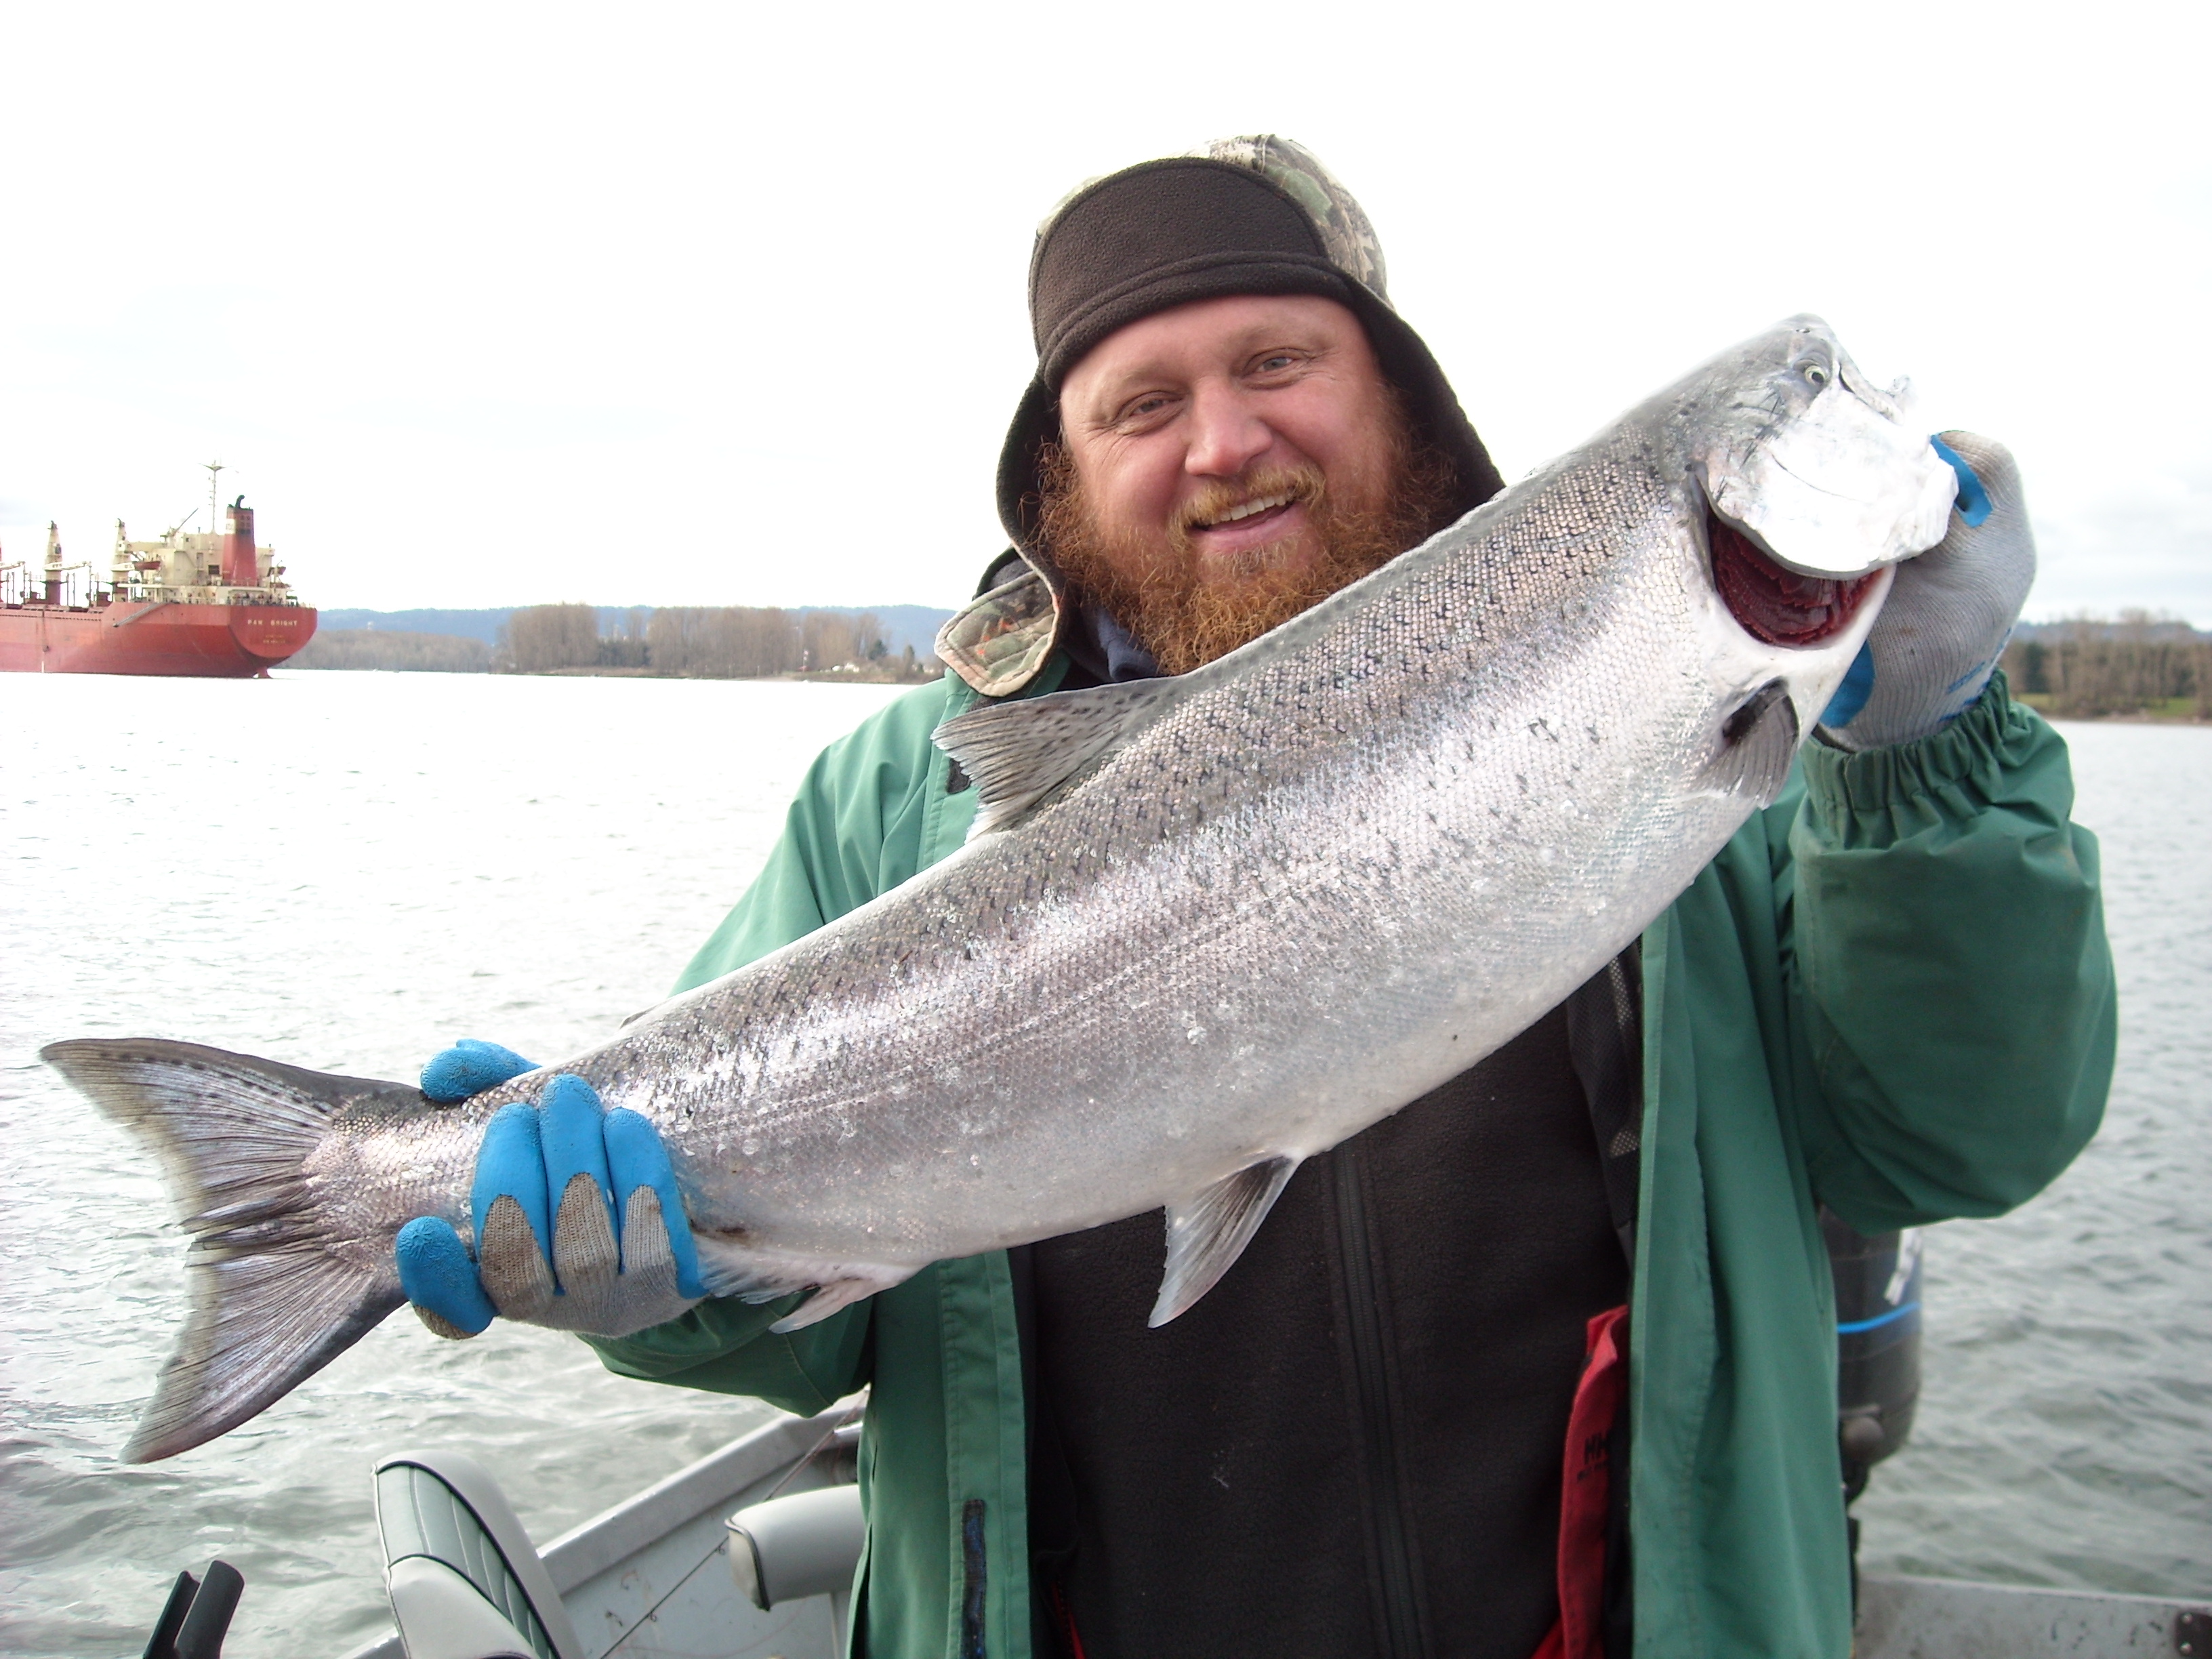 Andy with an early spring Chinook from the Columbia River